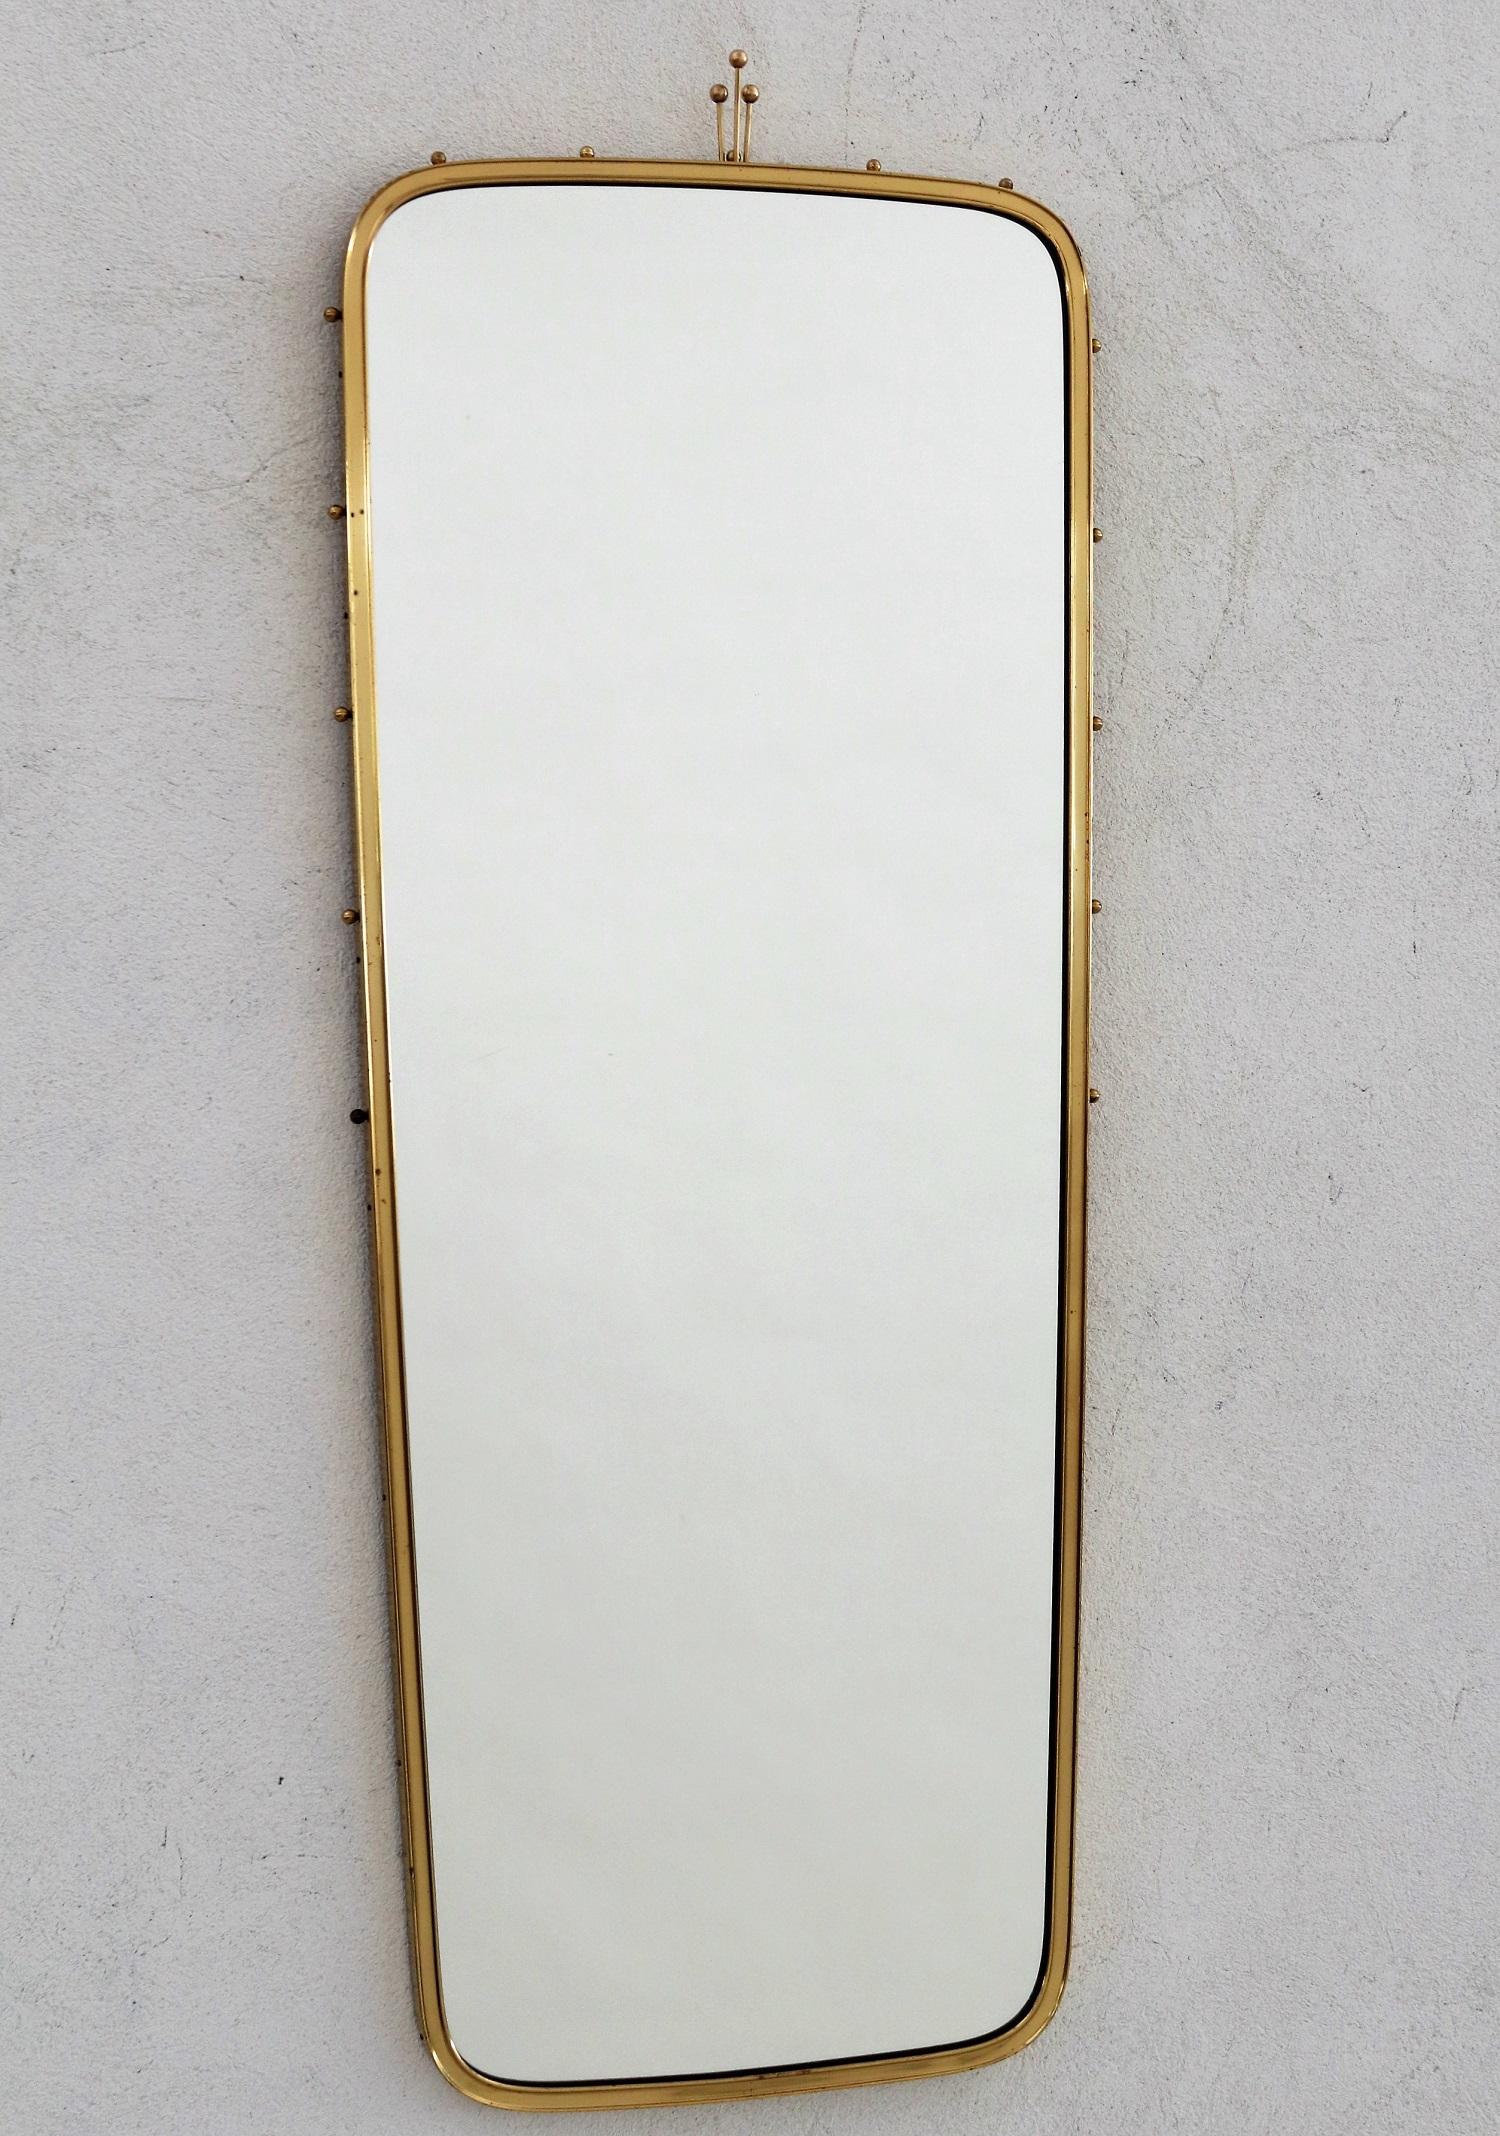 Elegant long crystal glass wall mirror with brass frame and nice brass details.
Made in the 1970s. Very good quality.
The mirror is in the original shape, no defects, but shows some normal vintage spots on the brass (see all pictures)
The long